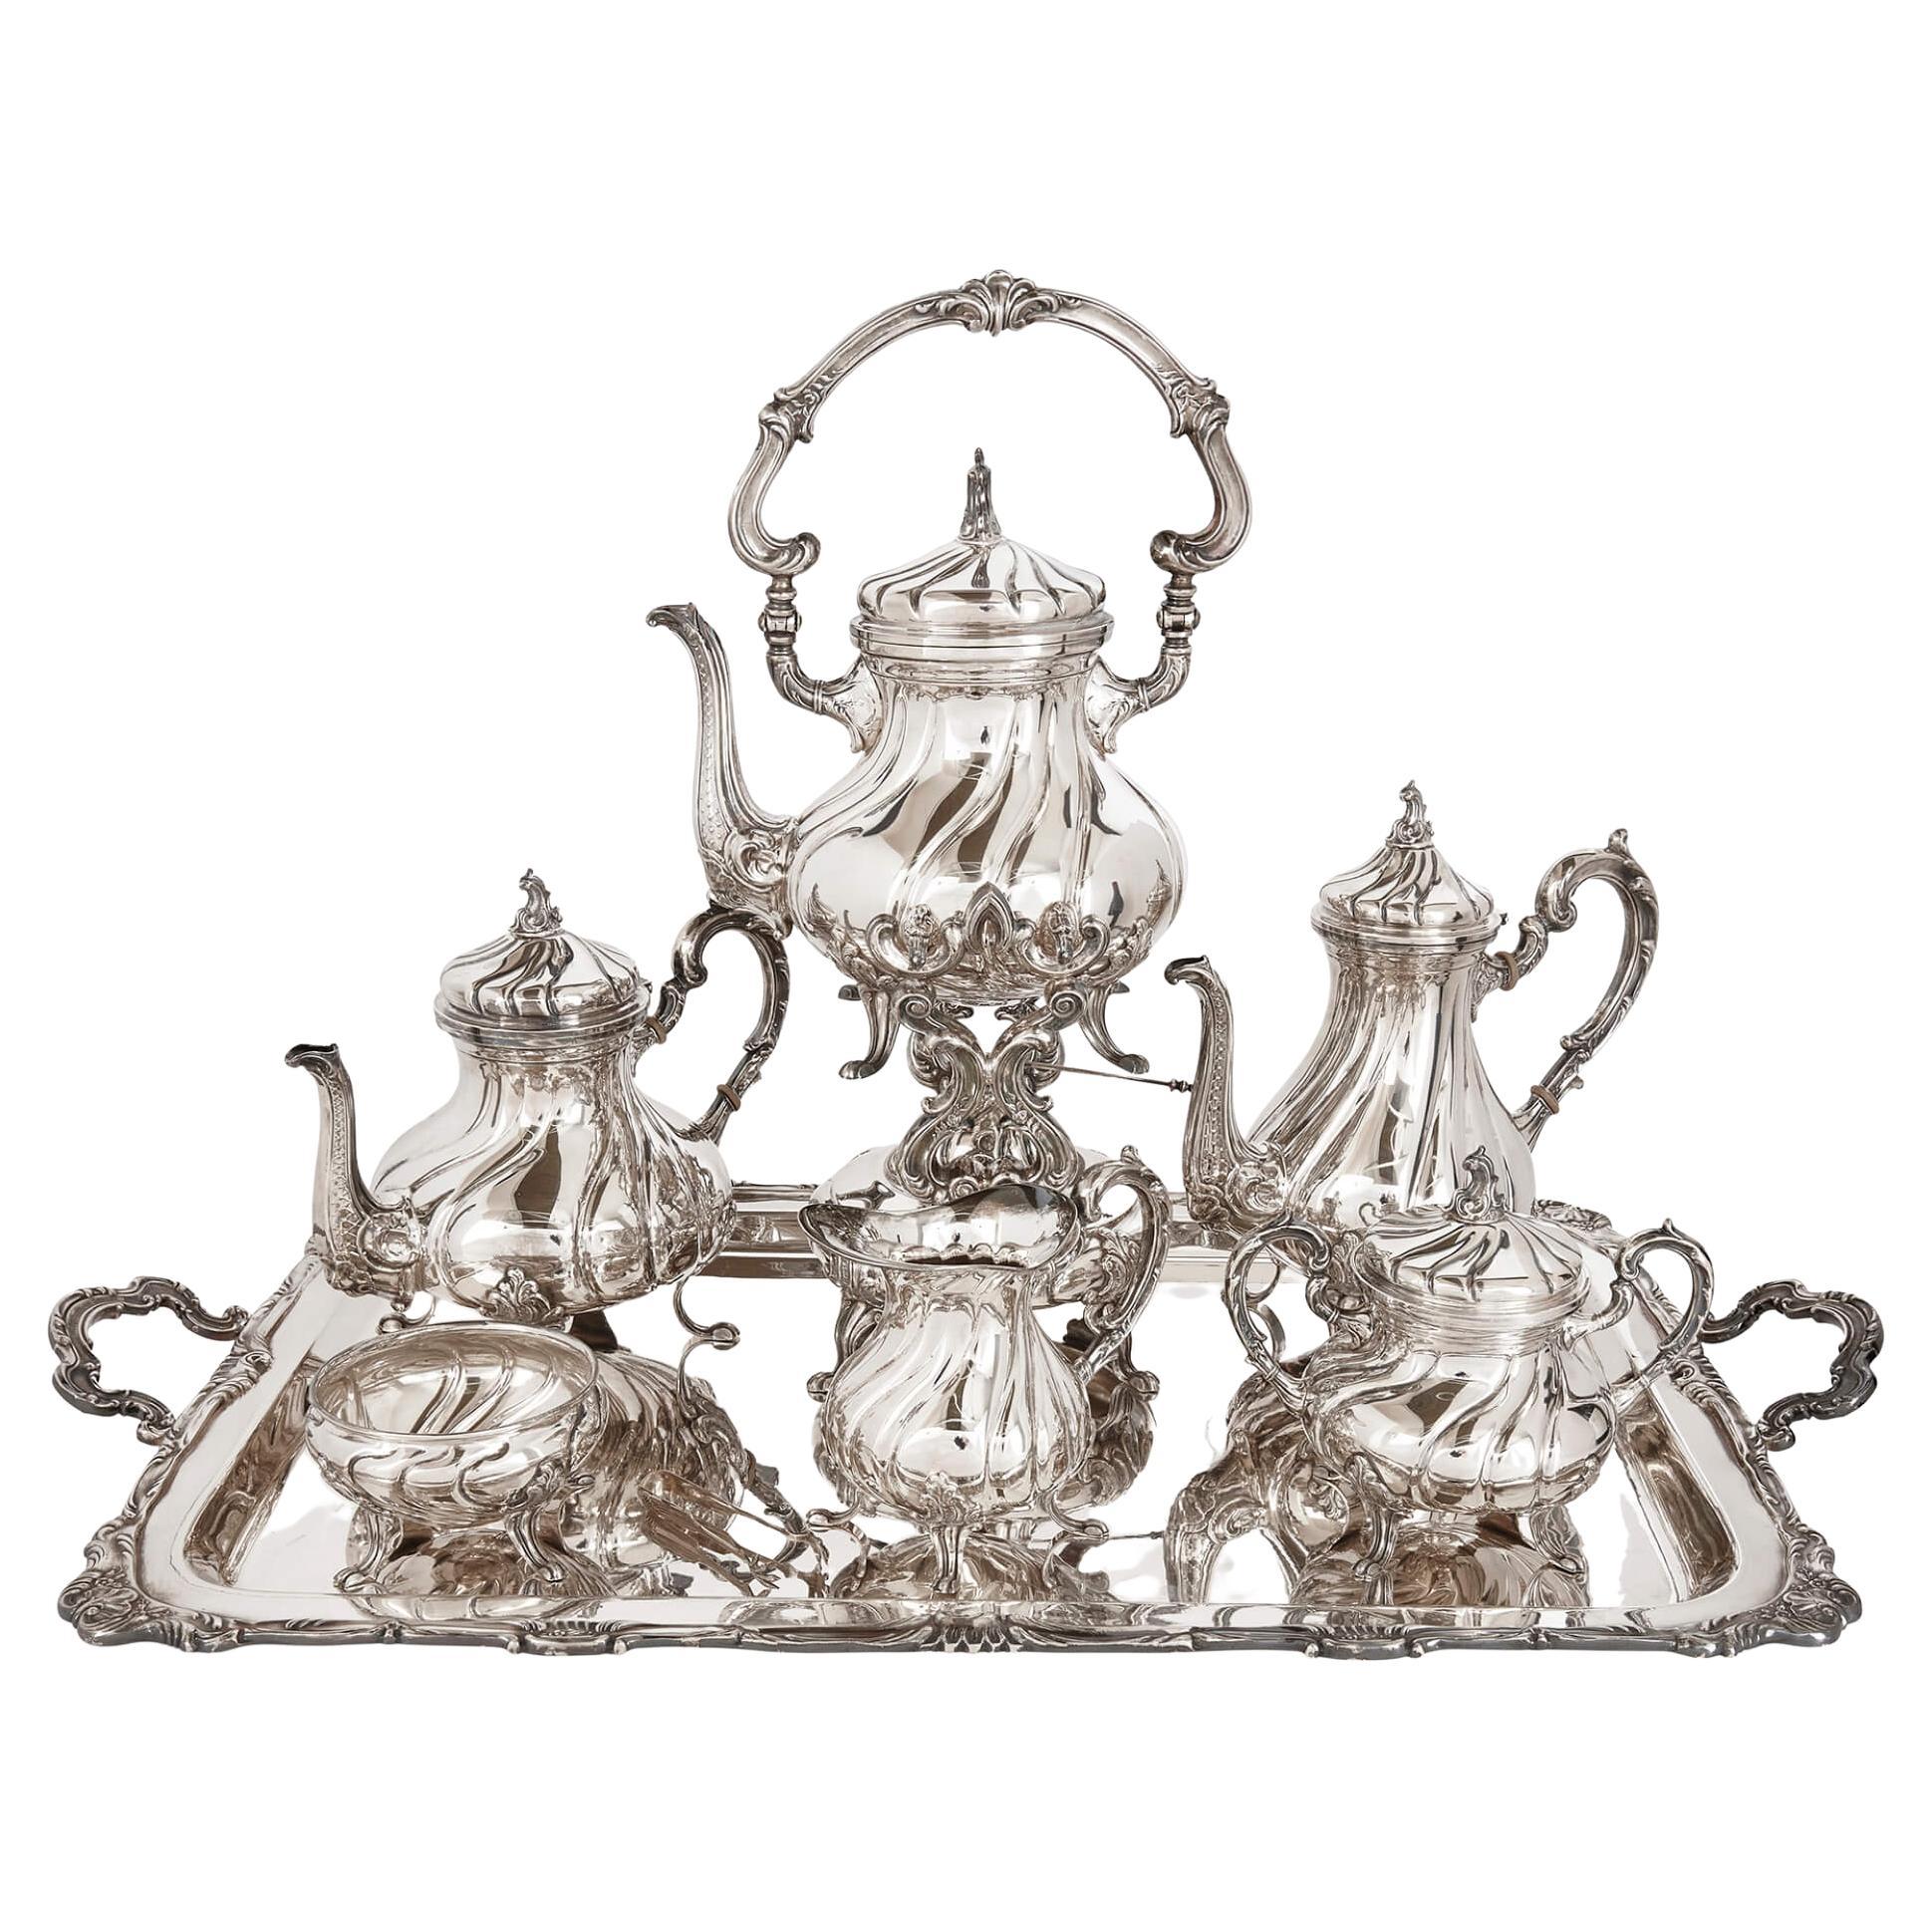 20th Century Peruvian Silver Tea and Coffee Set by Camusso